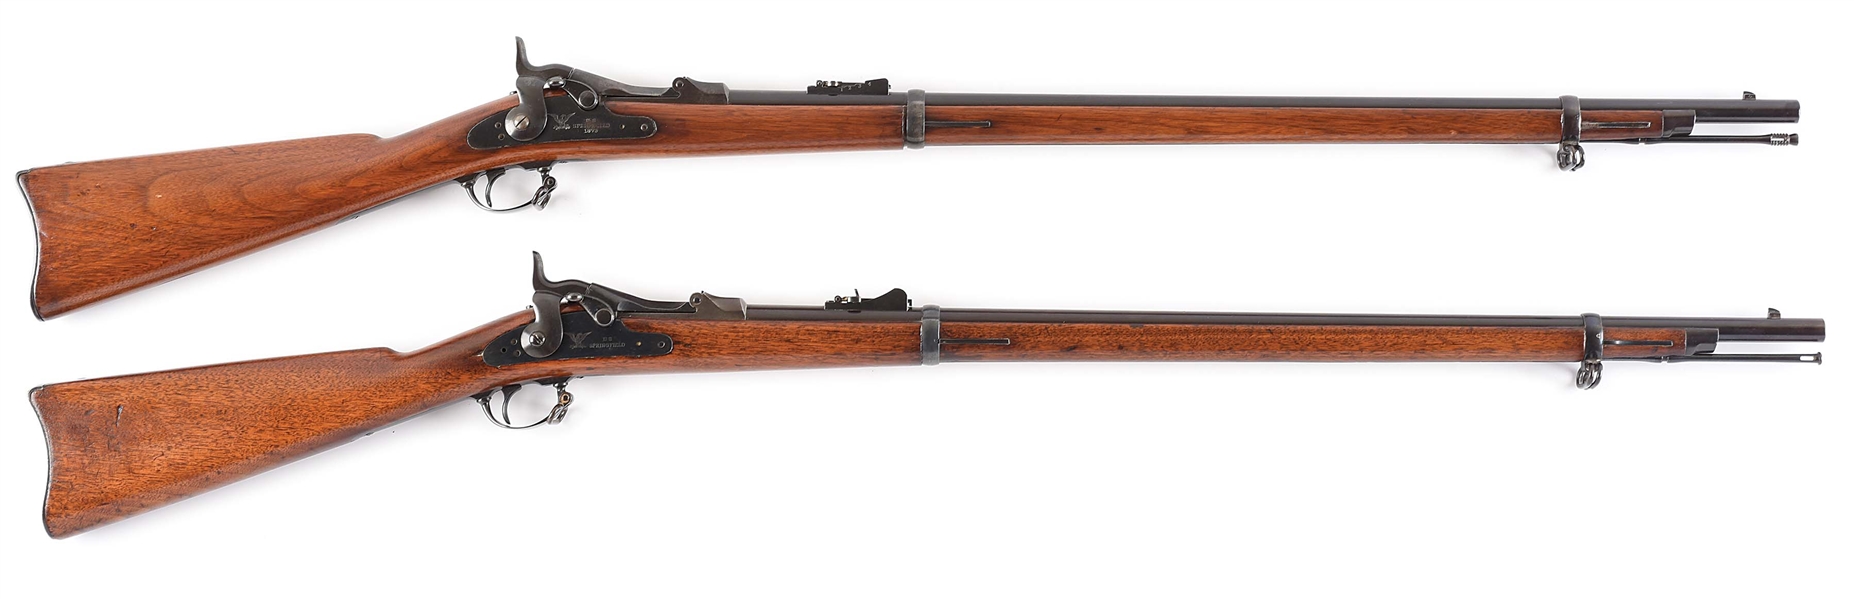 (A) LOT OF TWO: SPRINGFIELD 1873 TRAPDOOR RIFLES.